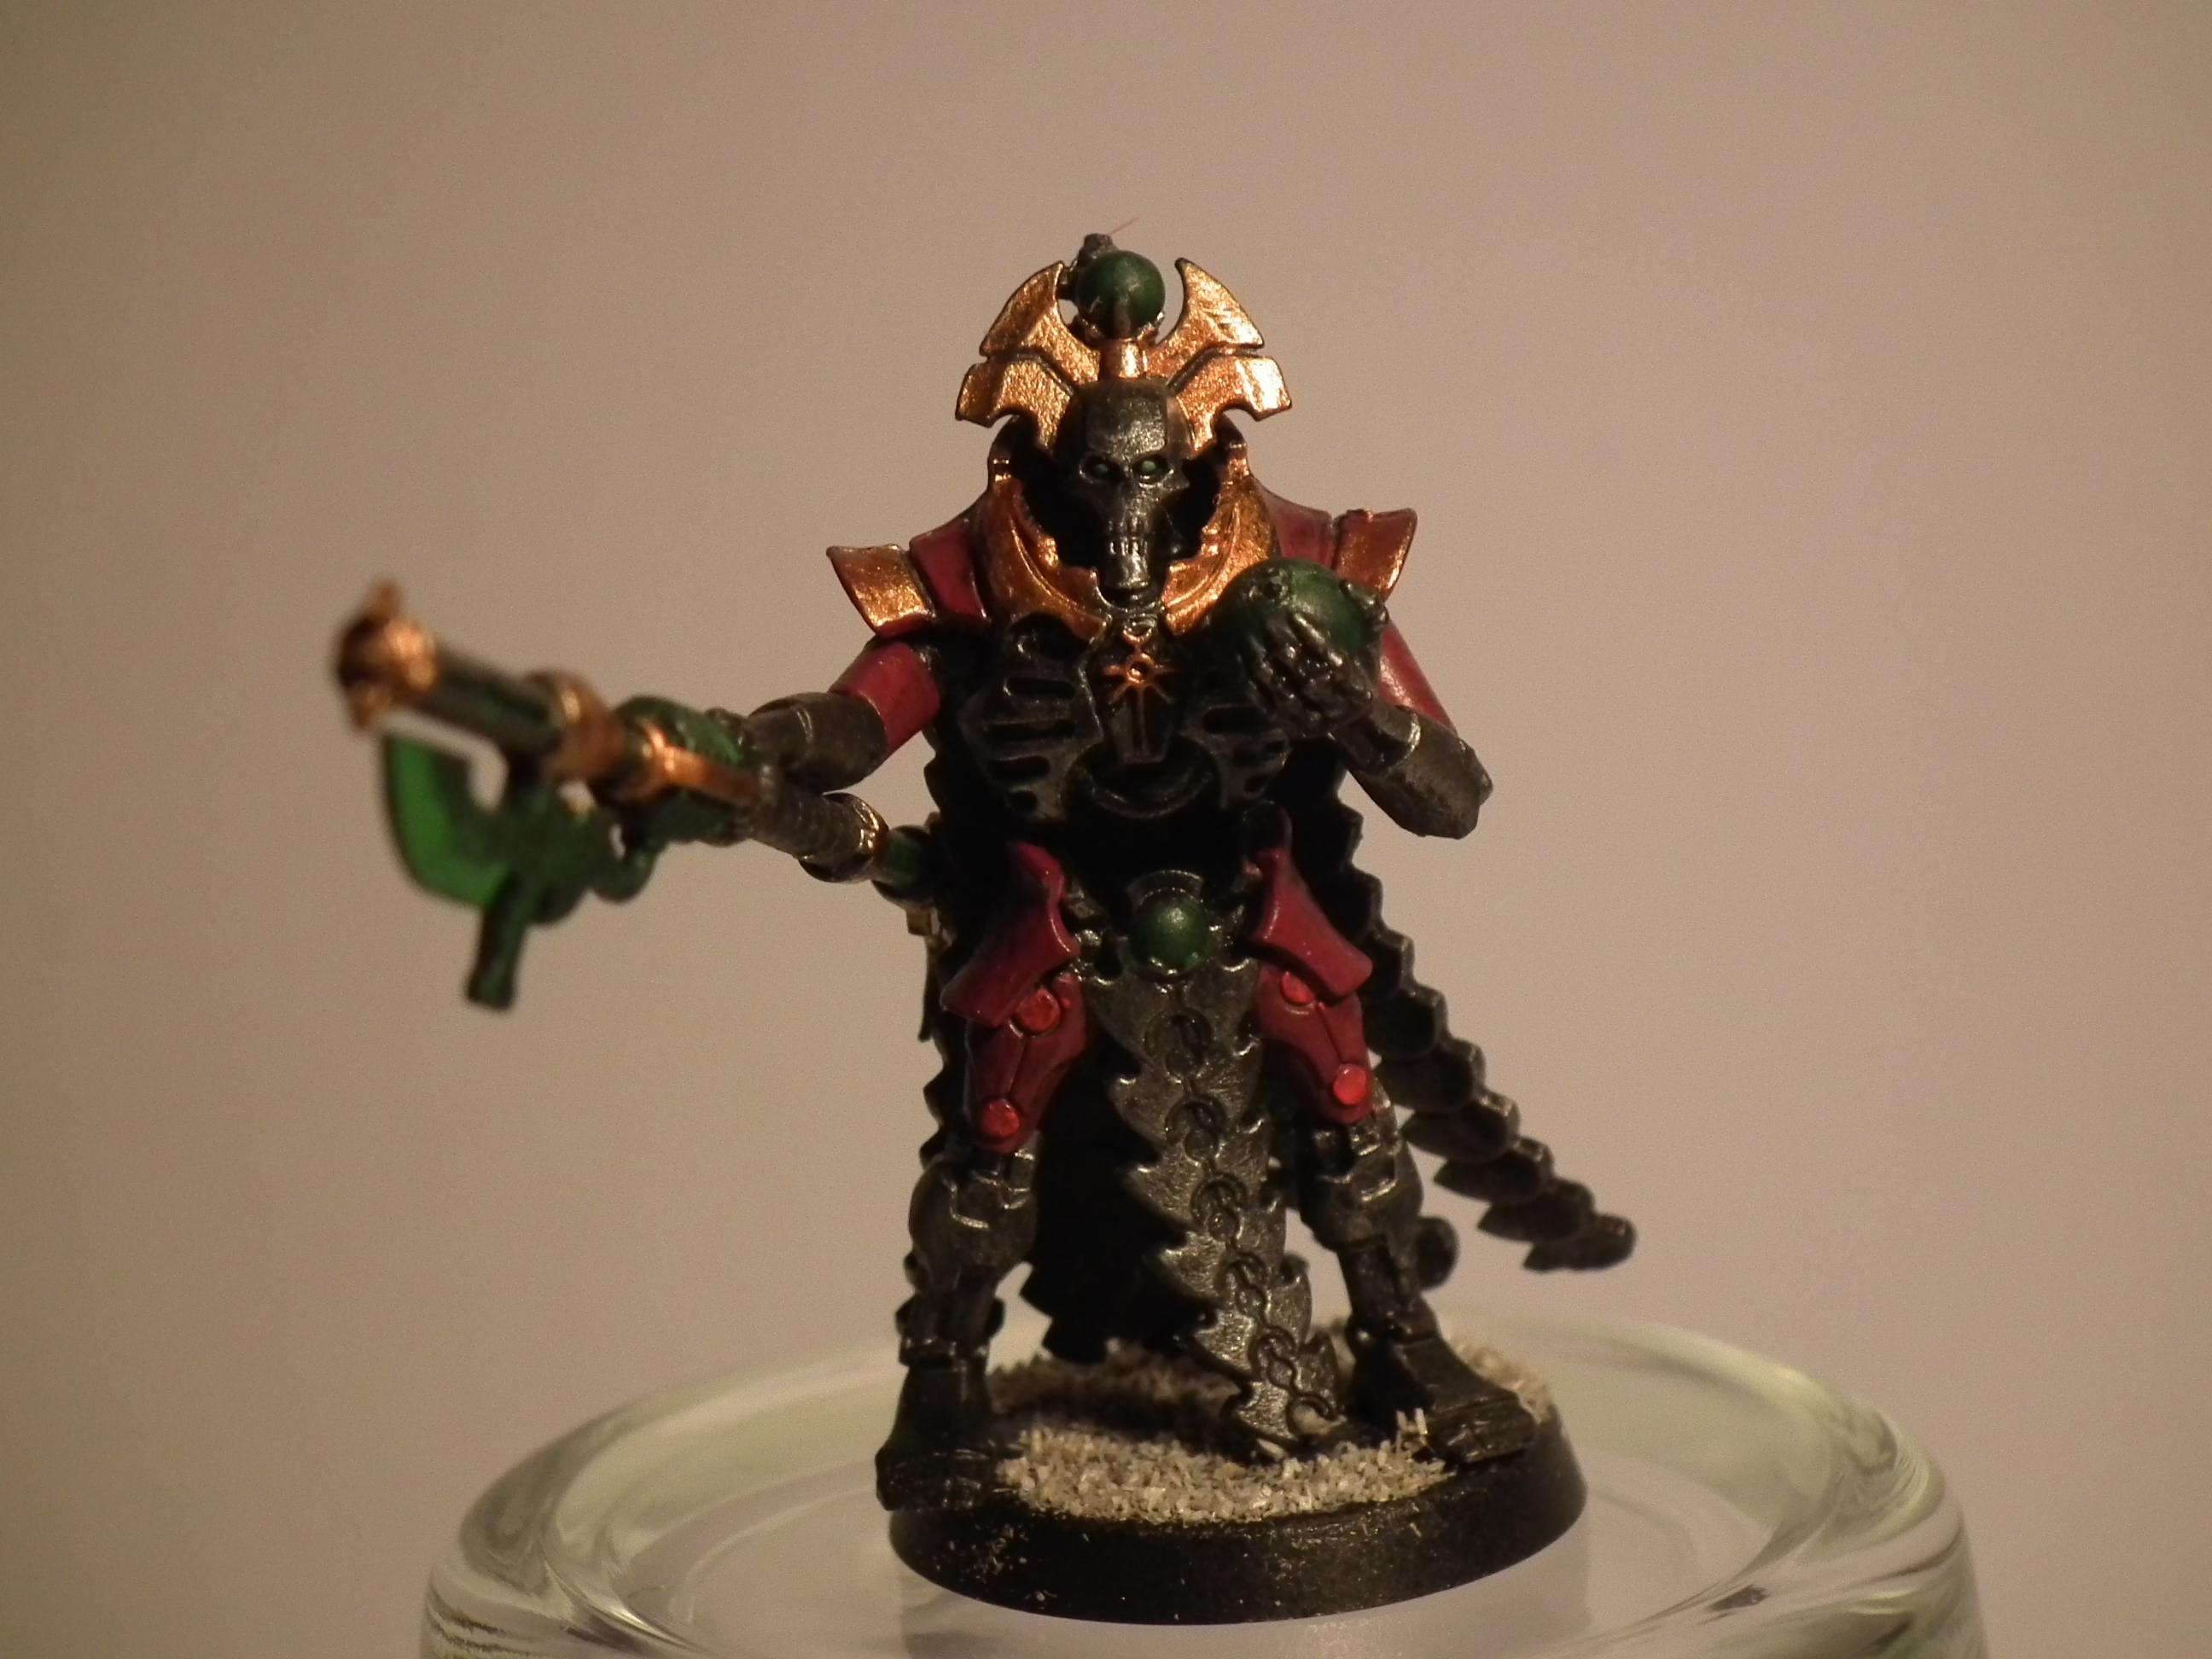 Necron Lord, Necron Lord with Resurrection Orb